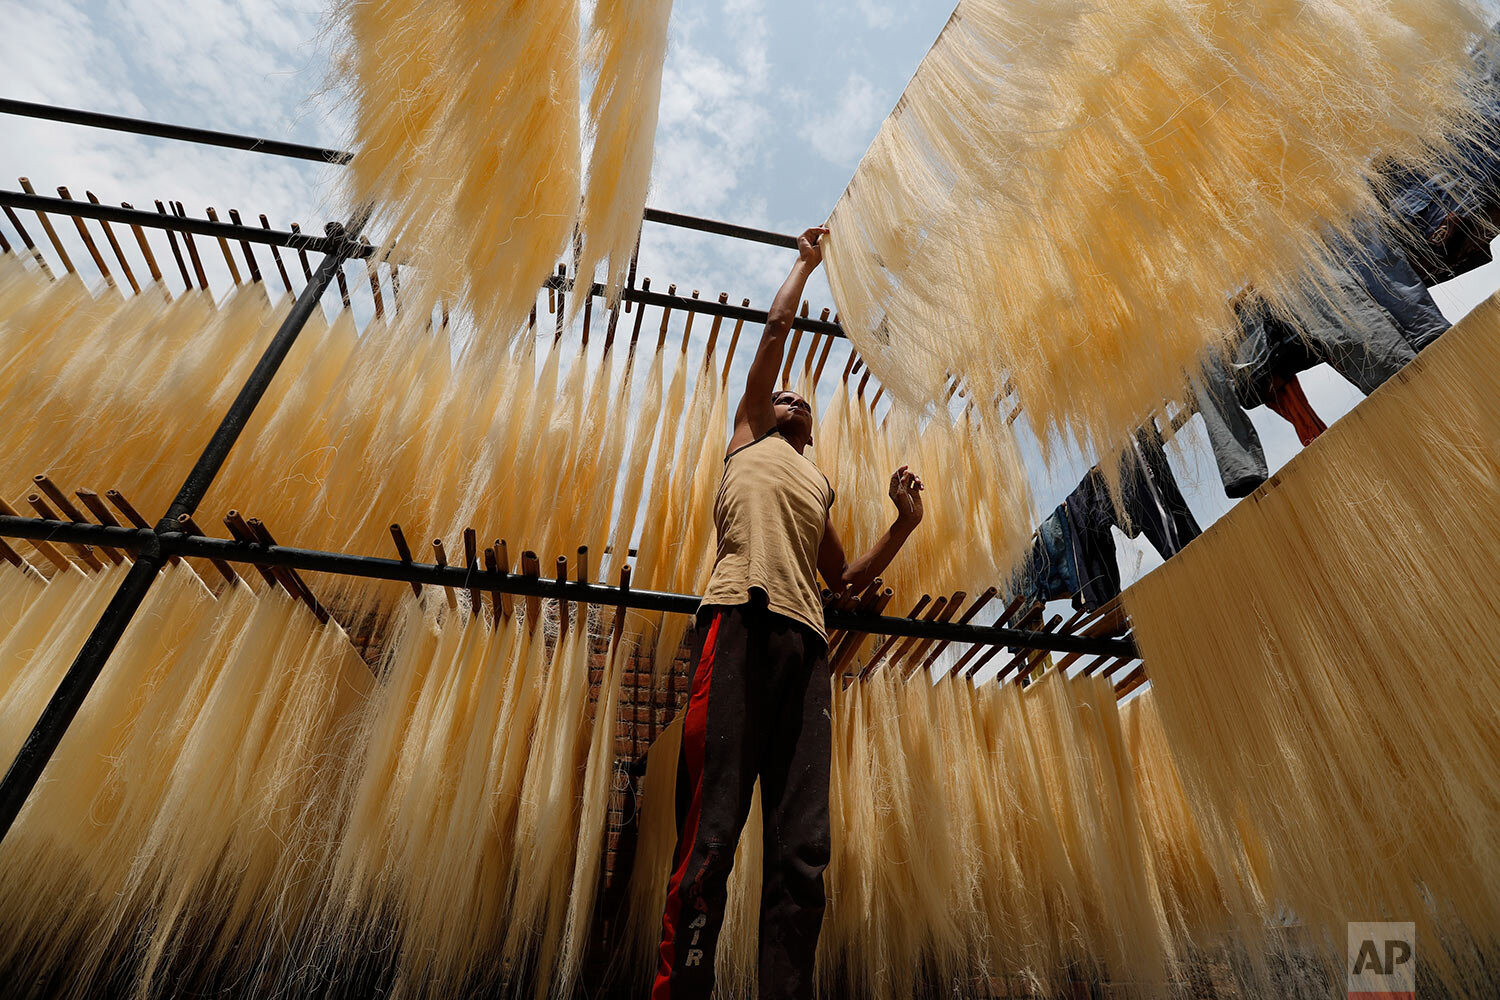  An Indian worker hangs strands of vermicelli to dry at a factory in Prayagraj, India, Saturday, April 25, 2020.  (AP Photo/Rajesh Kumar Singh) 